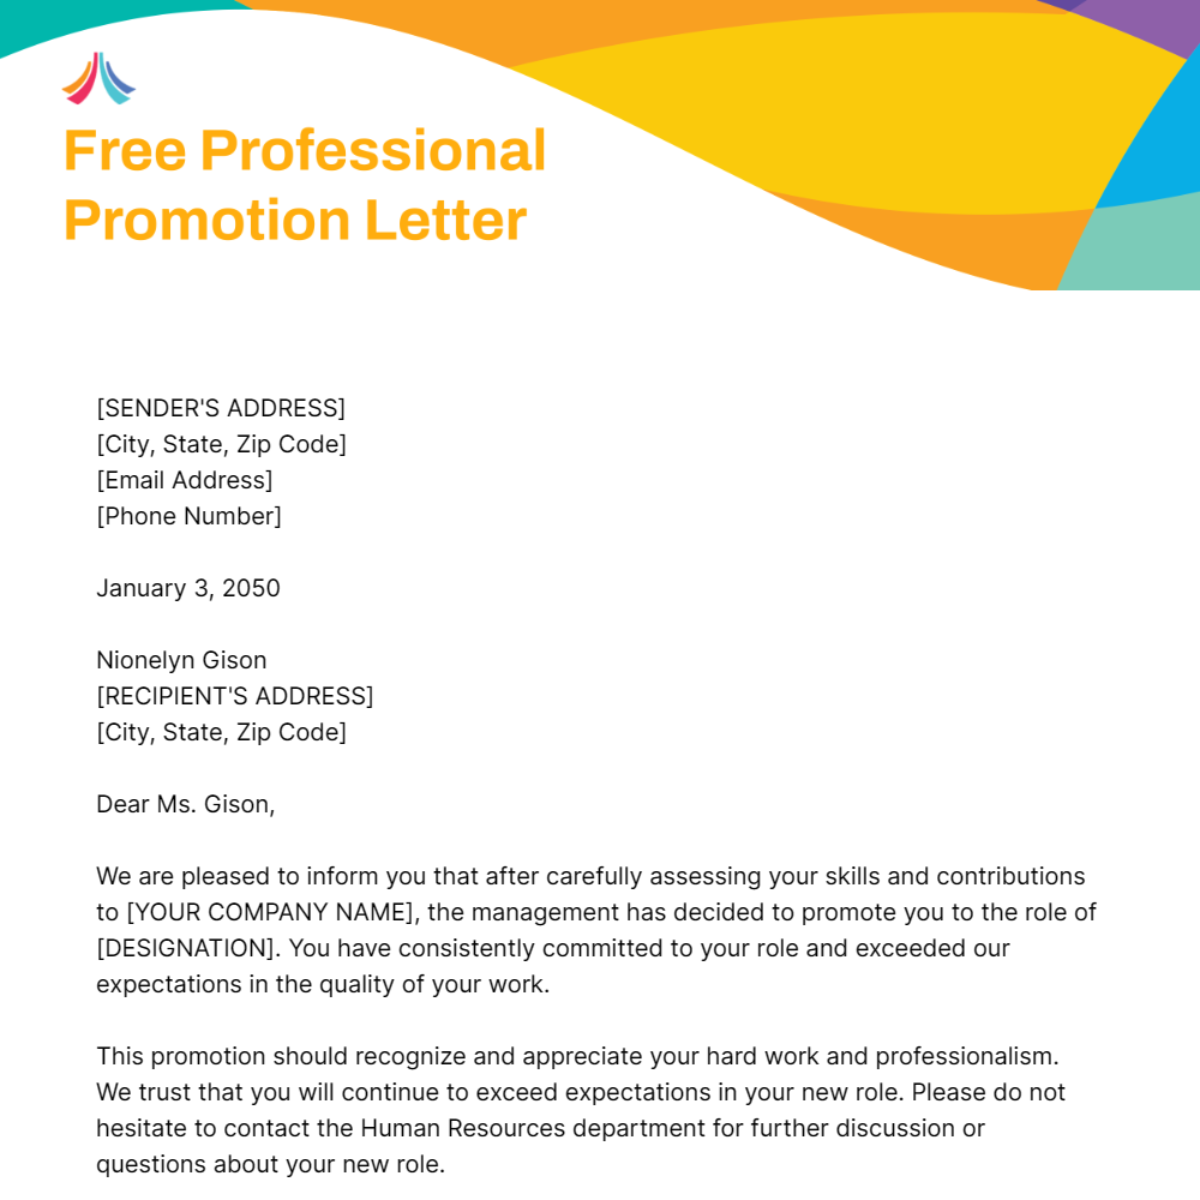 Free Professional Promotion Letter Template